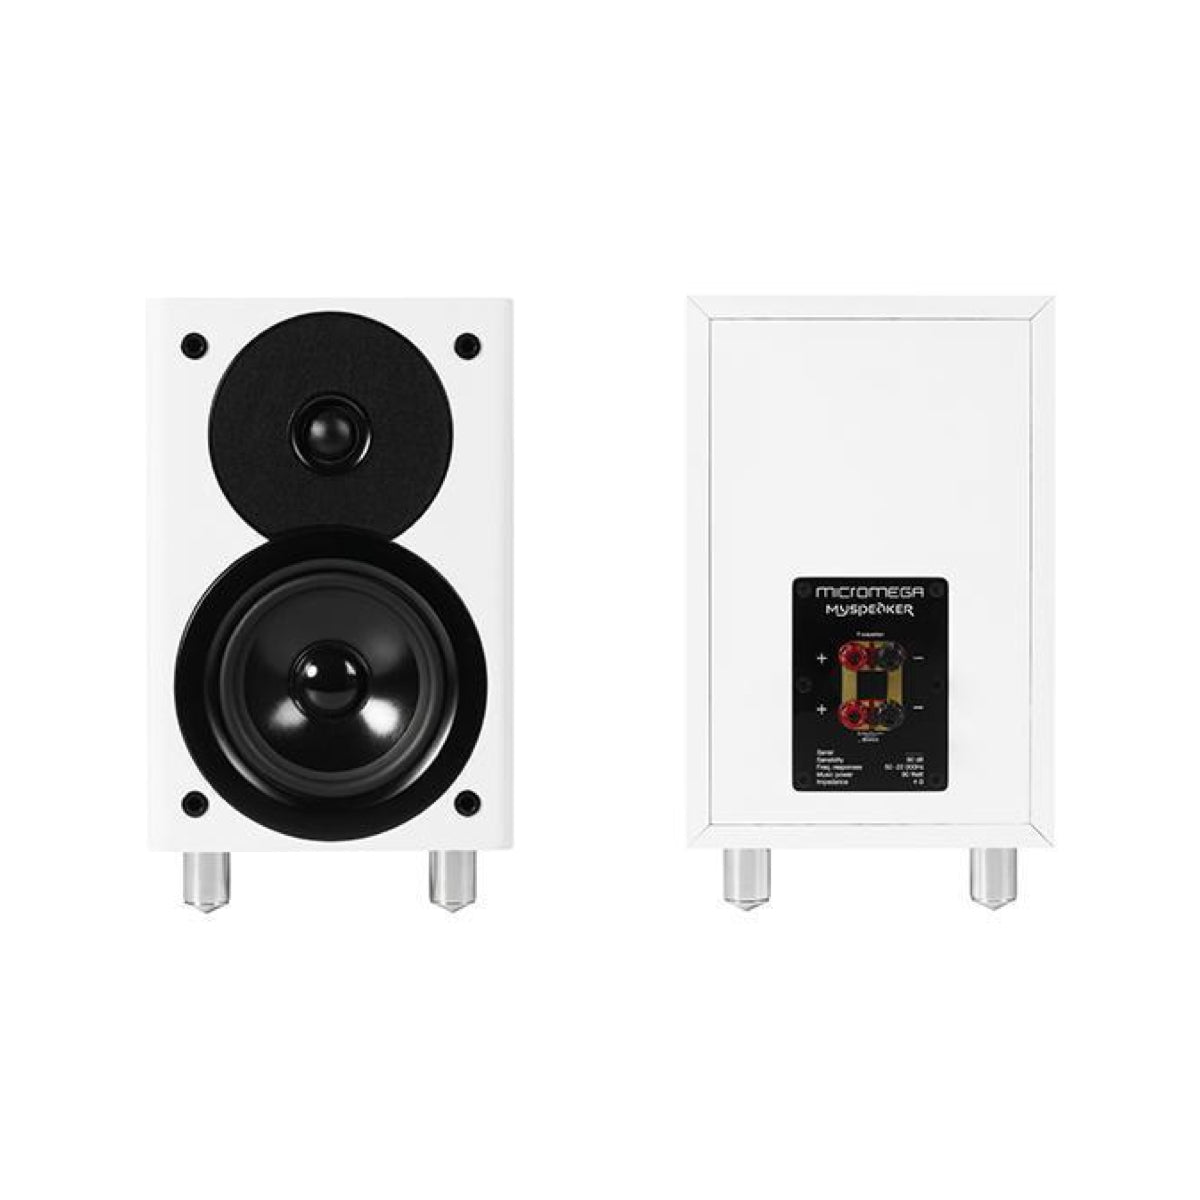 MicroMega MySystem Hi-Fi Pack (Includes Amplifier, Speaker and Cables) - Auratech LLC